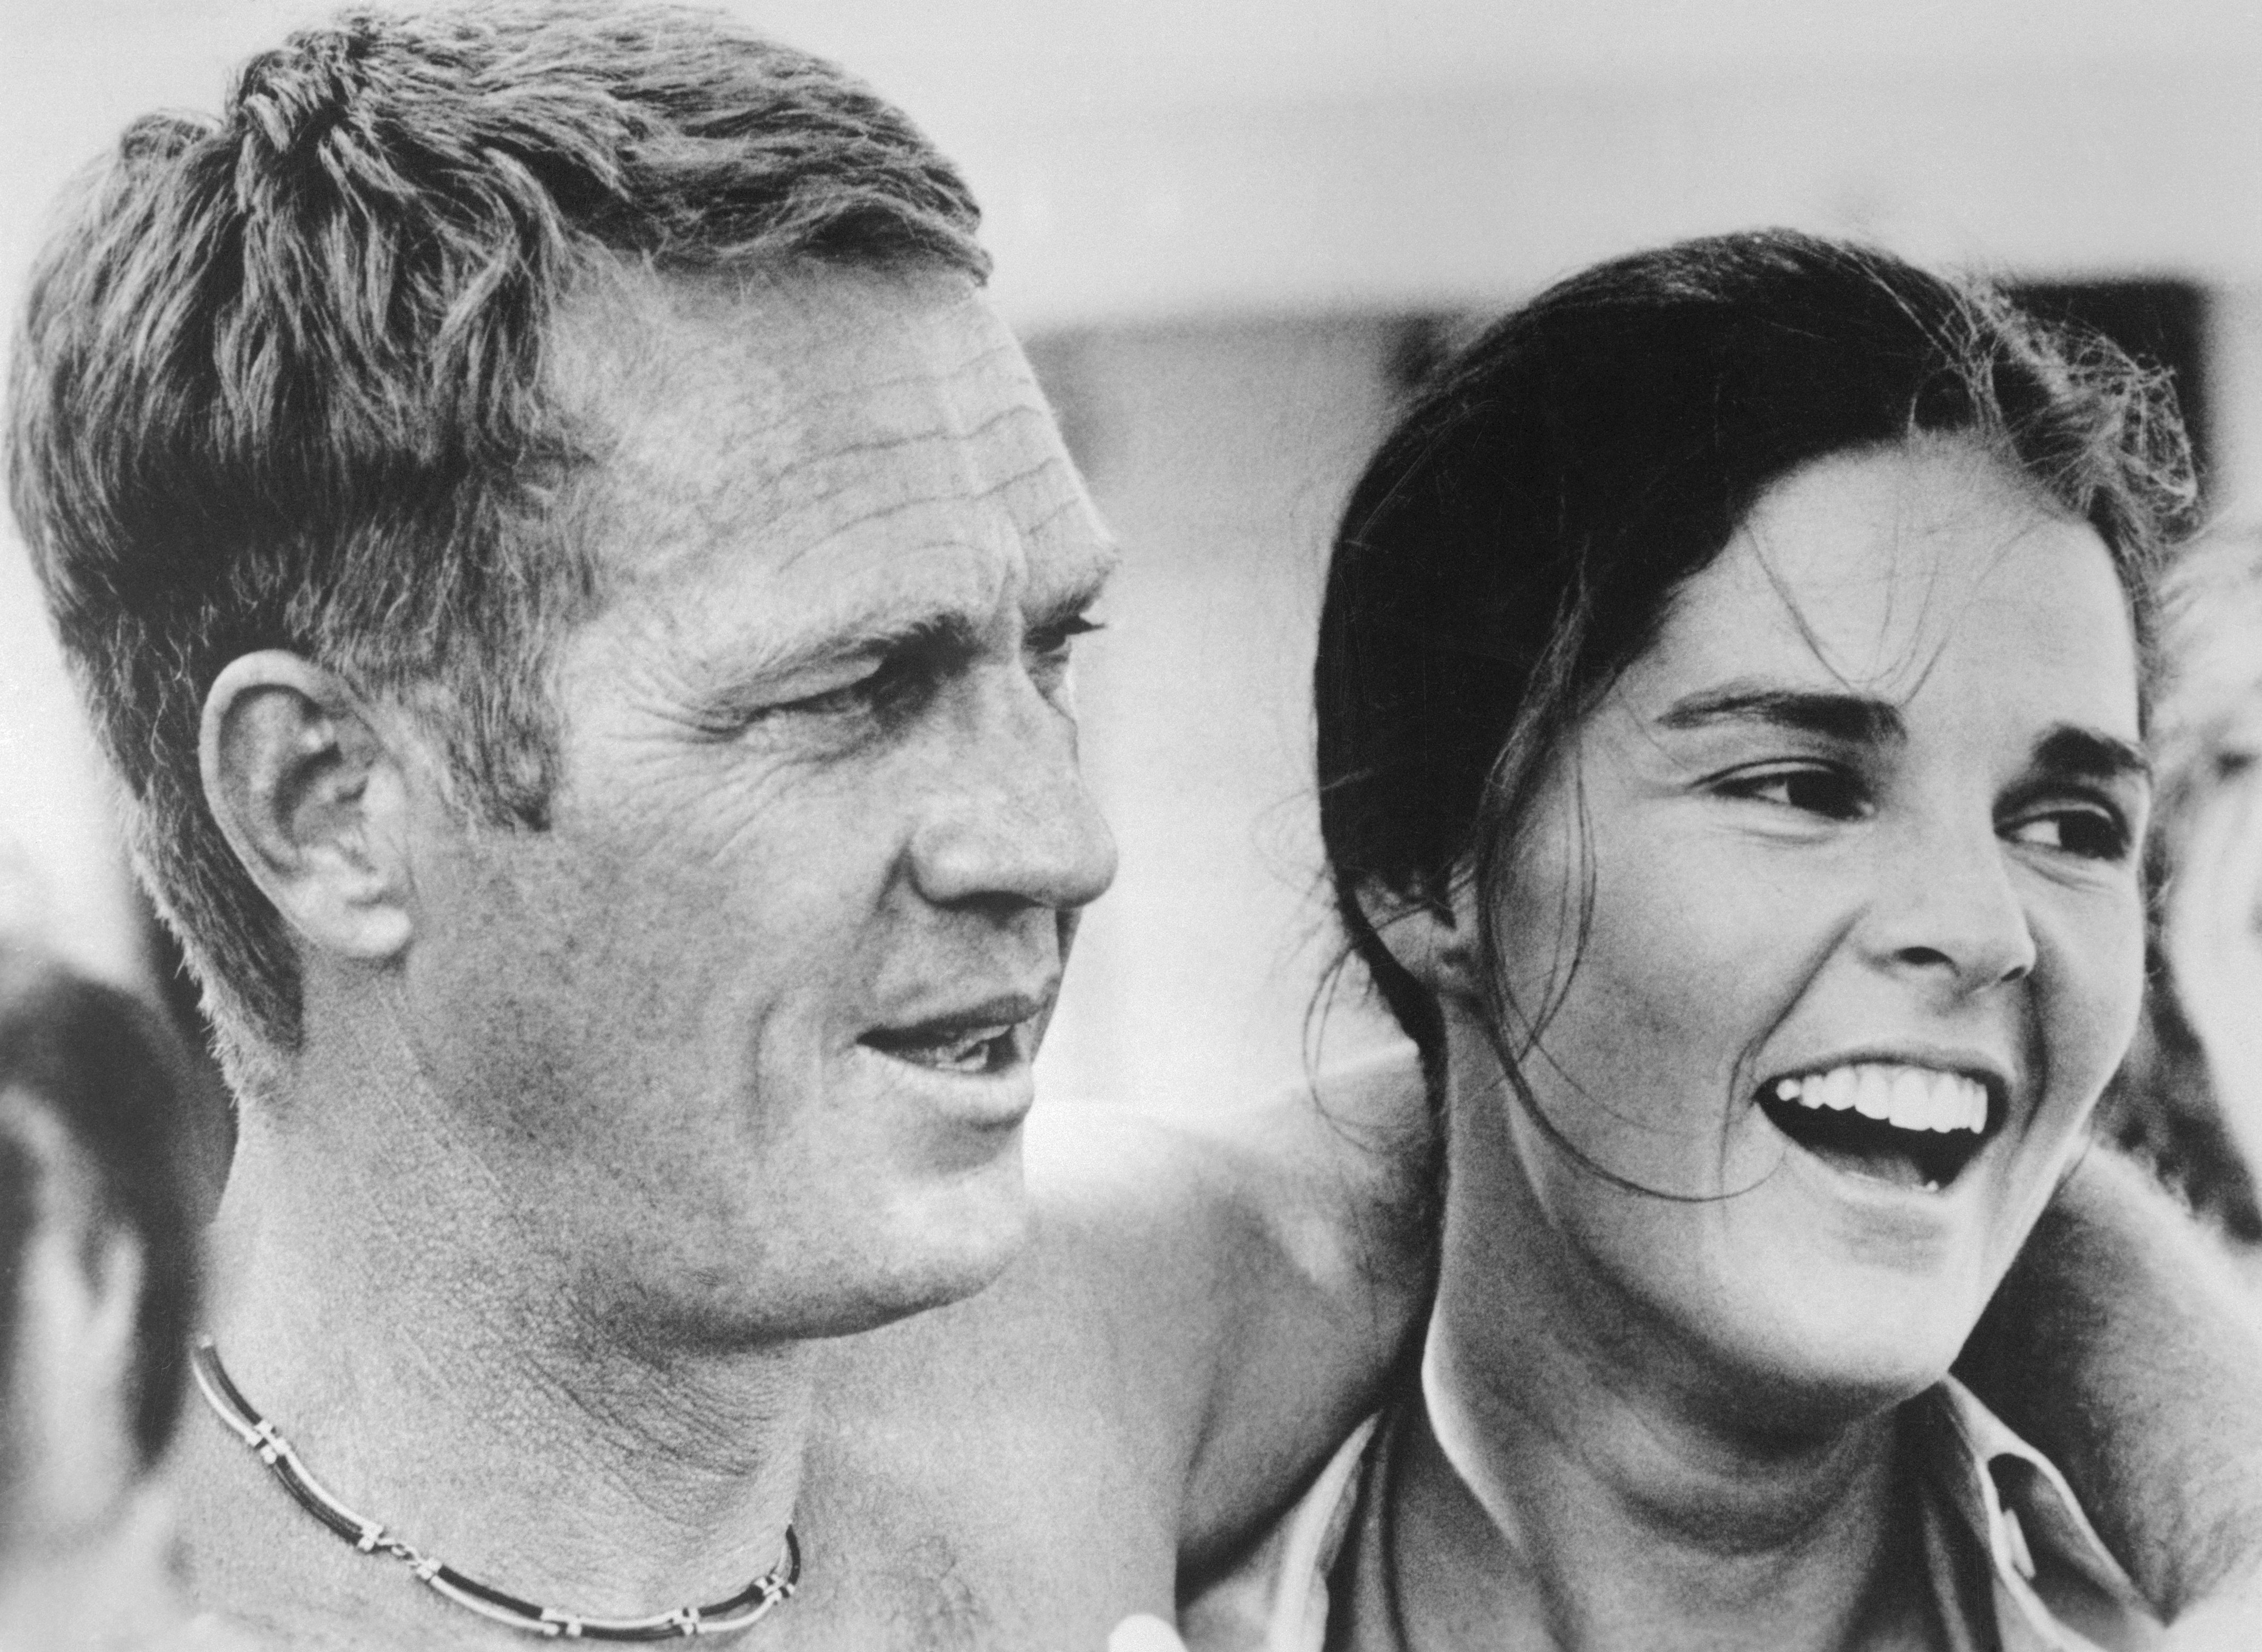 Steve McQueen and Ali MacGraw in a scene from the 1972 movie "The Getaway." | Source: Getty Images